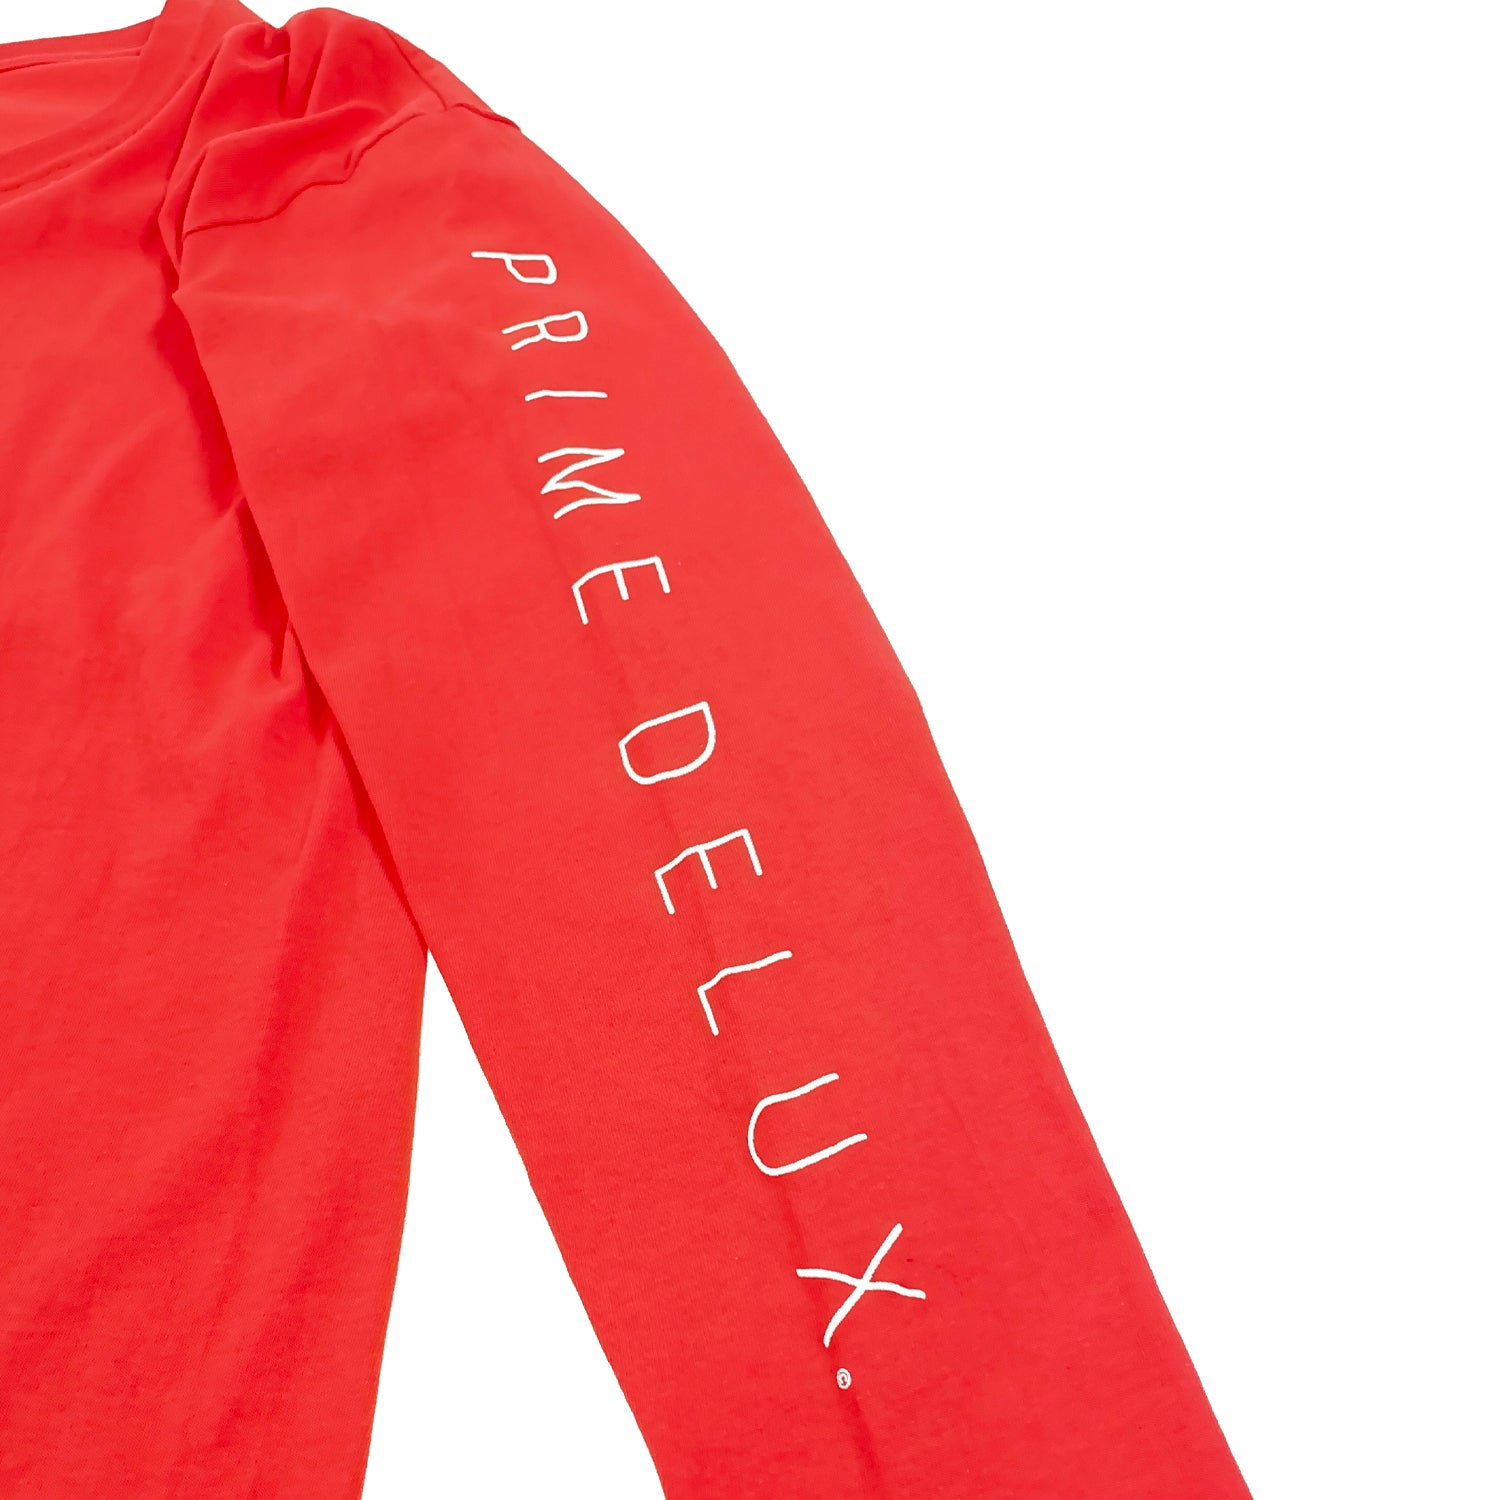 Prime Delux Unity Long Sleeve T Shirt - Red / White - Prime Delux Store